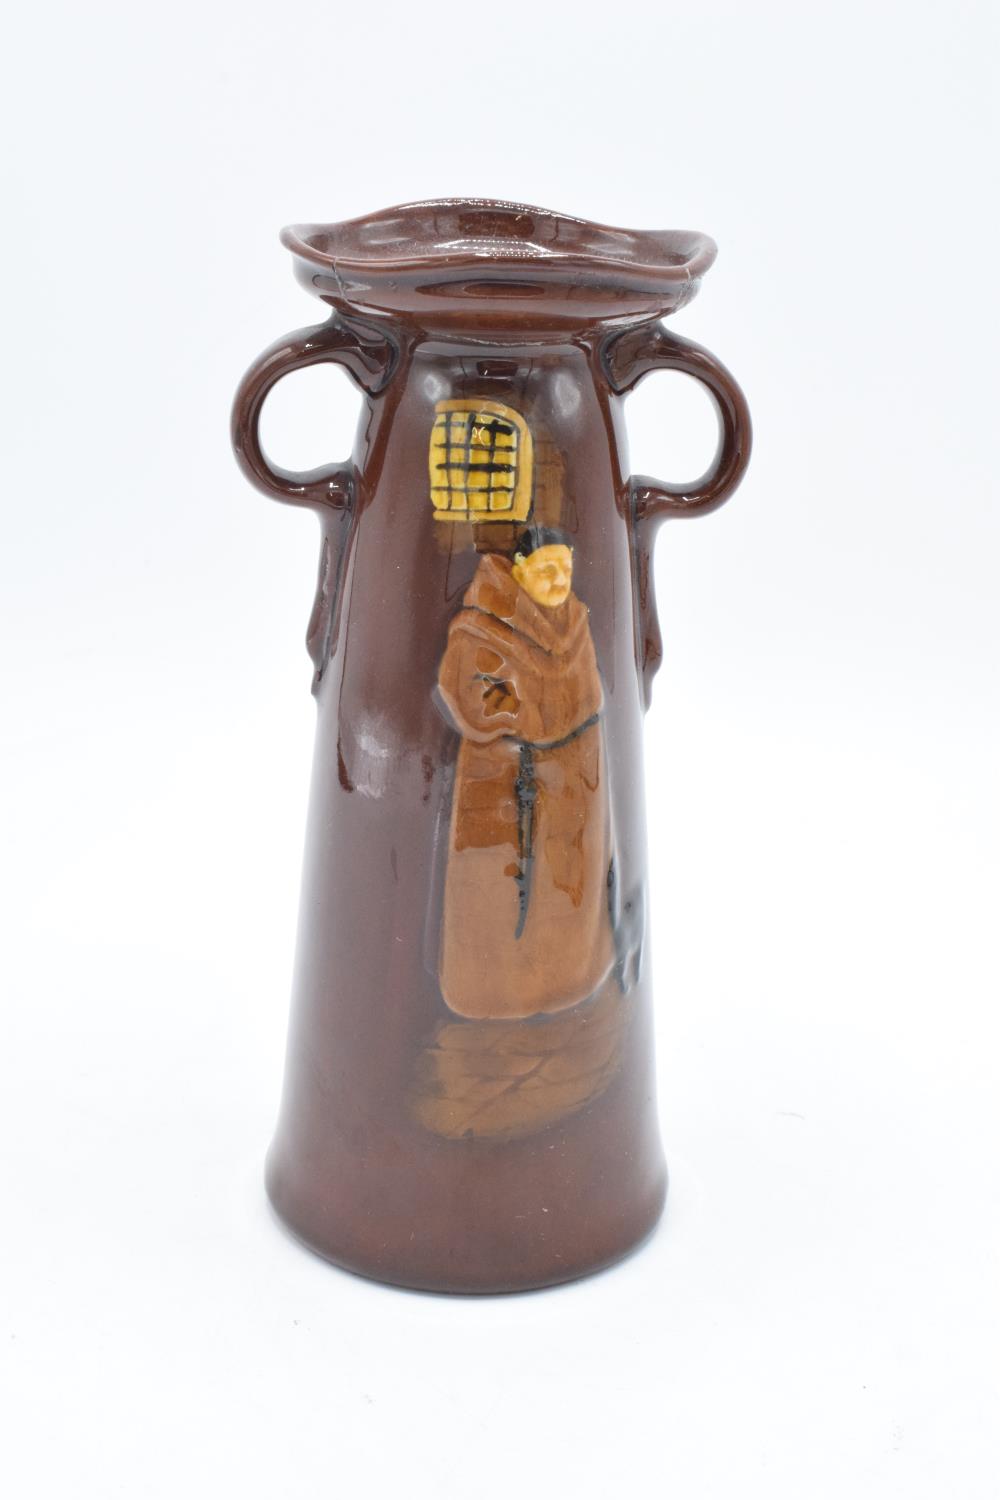 Royal Doulton Kingsware Monk in the Cellar and Egyptian series ware vase (2). Monks vase a/f, - Image 5 of 8